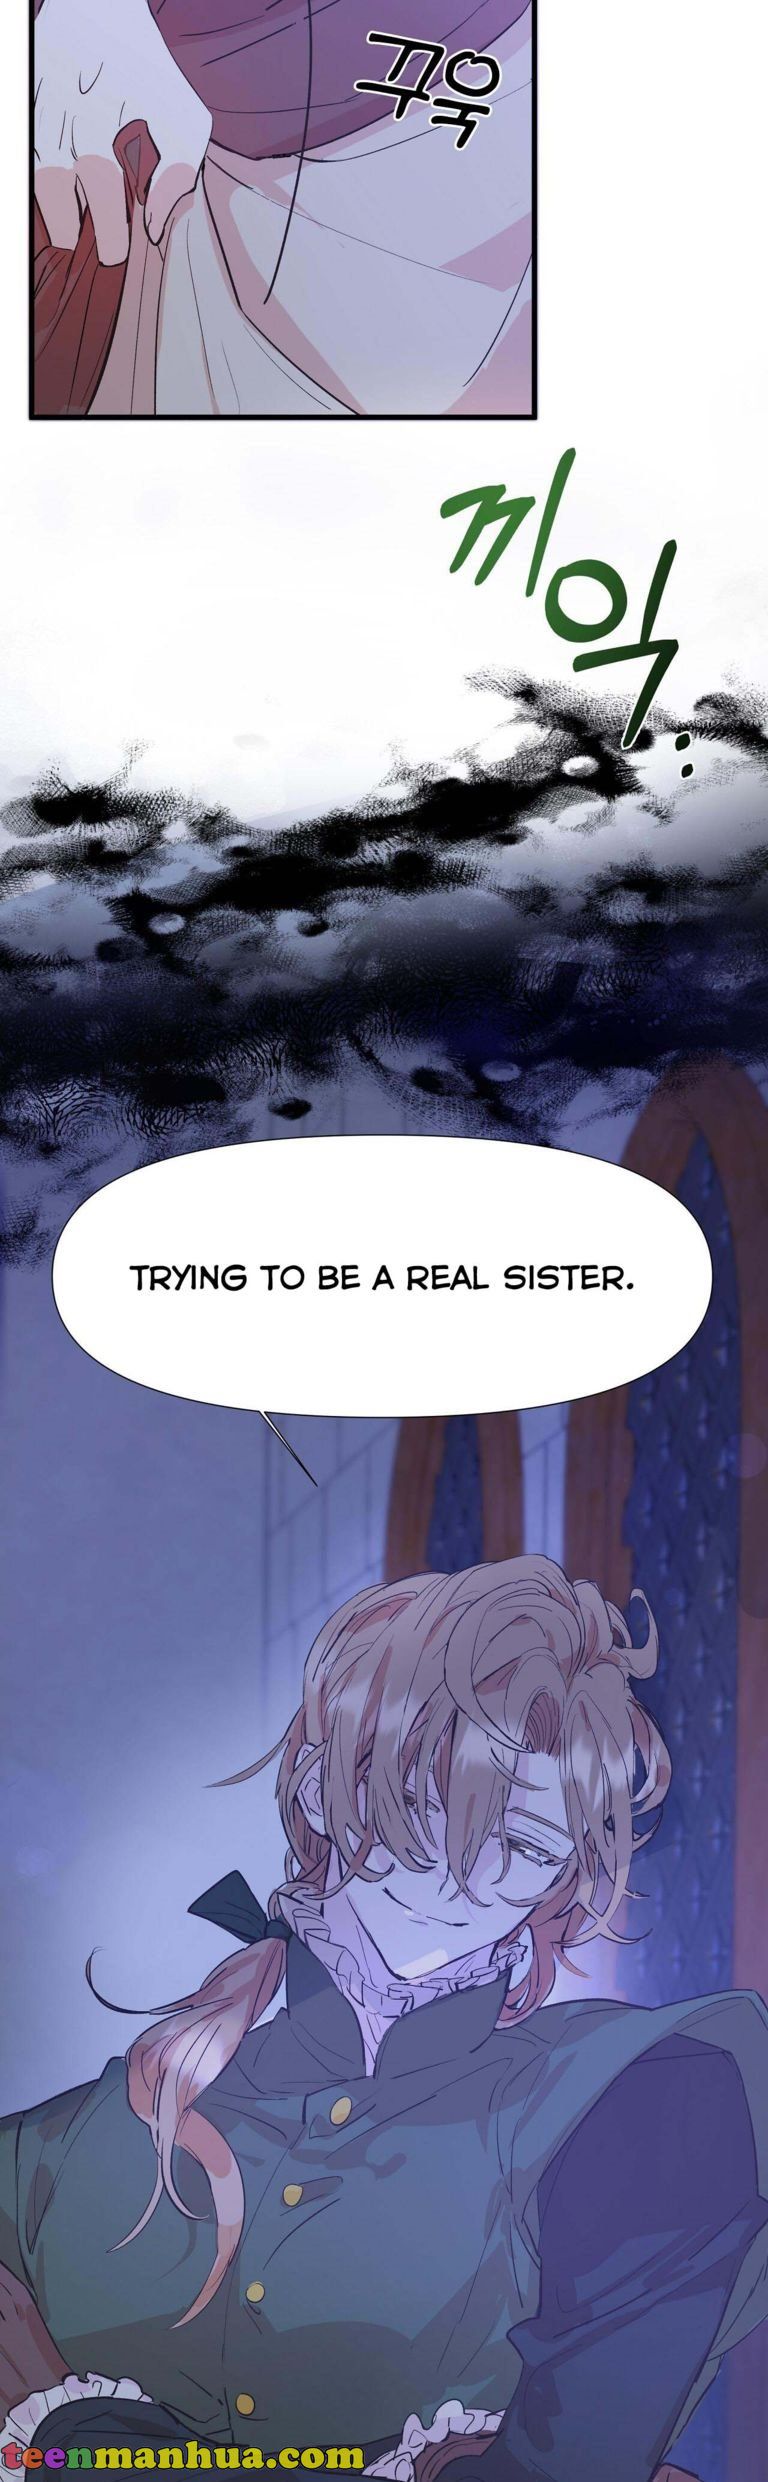 If You Want a Fake Sister chapter 1